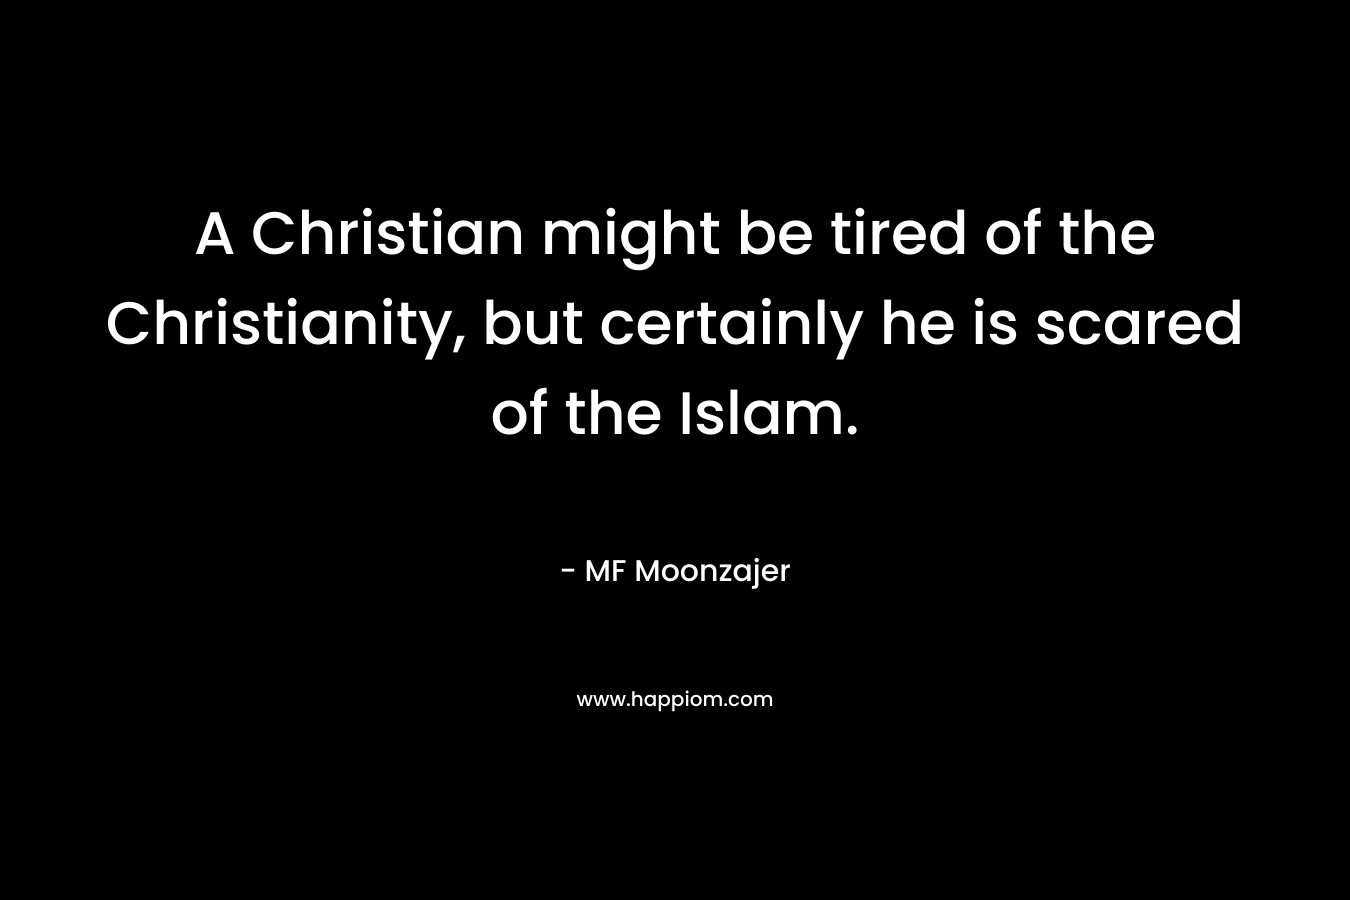 A Christian might be tired of the Christianity, but certainly he is scared of the Islam. – MF Moonzajer